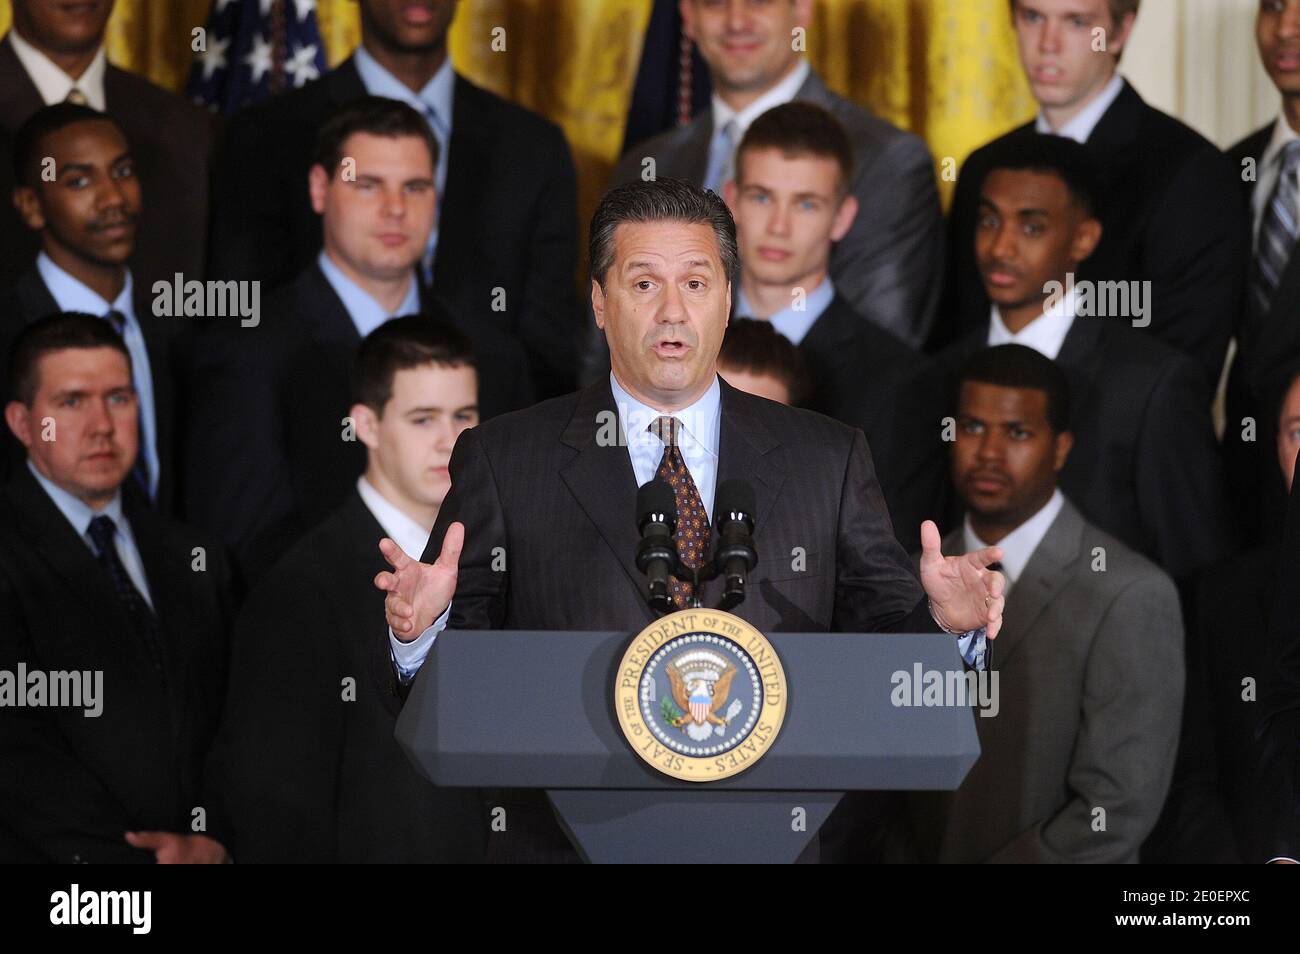 Coach John Calipari speaks during a celebration of the University of Kentucky men's basketball team for their 2012 NCAA championship in the East Room of the White House in Washington, DC, on May 4, 2012. Photo by Olivier Douliery/ABACAPRESS.COM Stock Photo